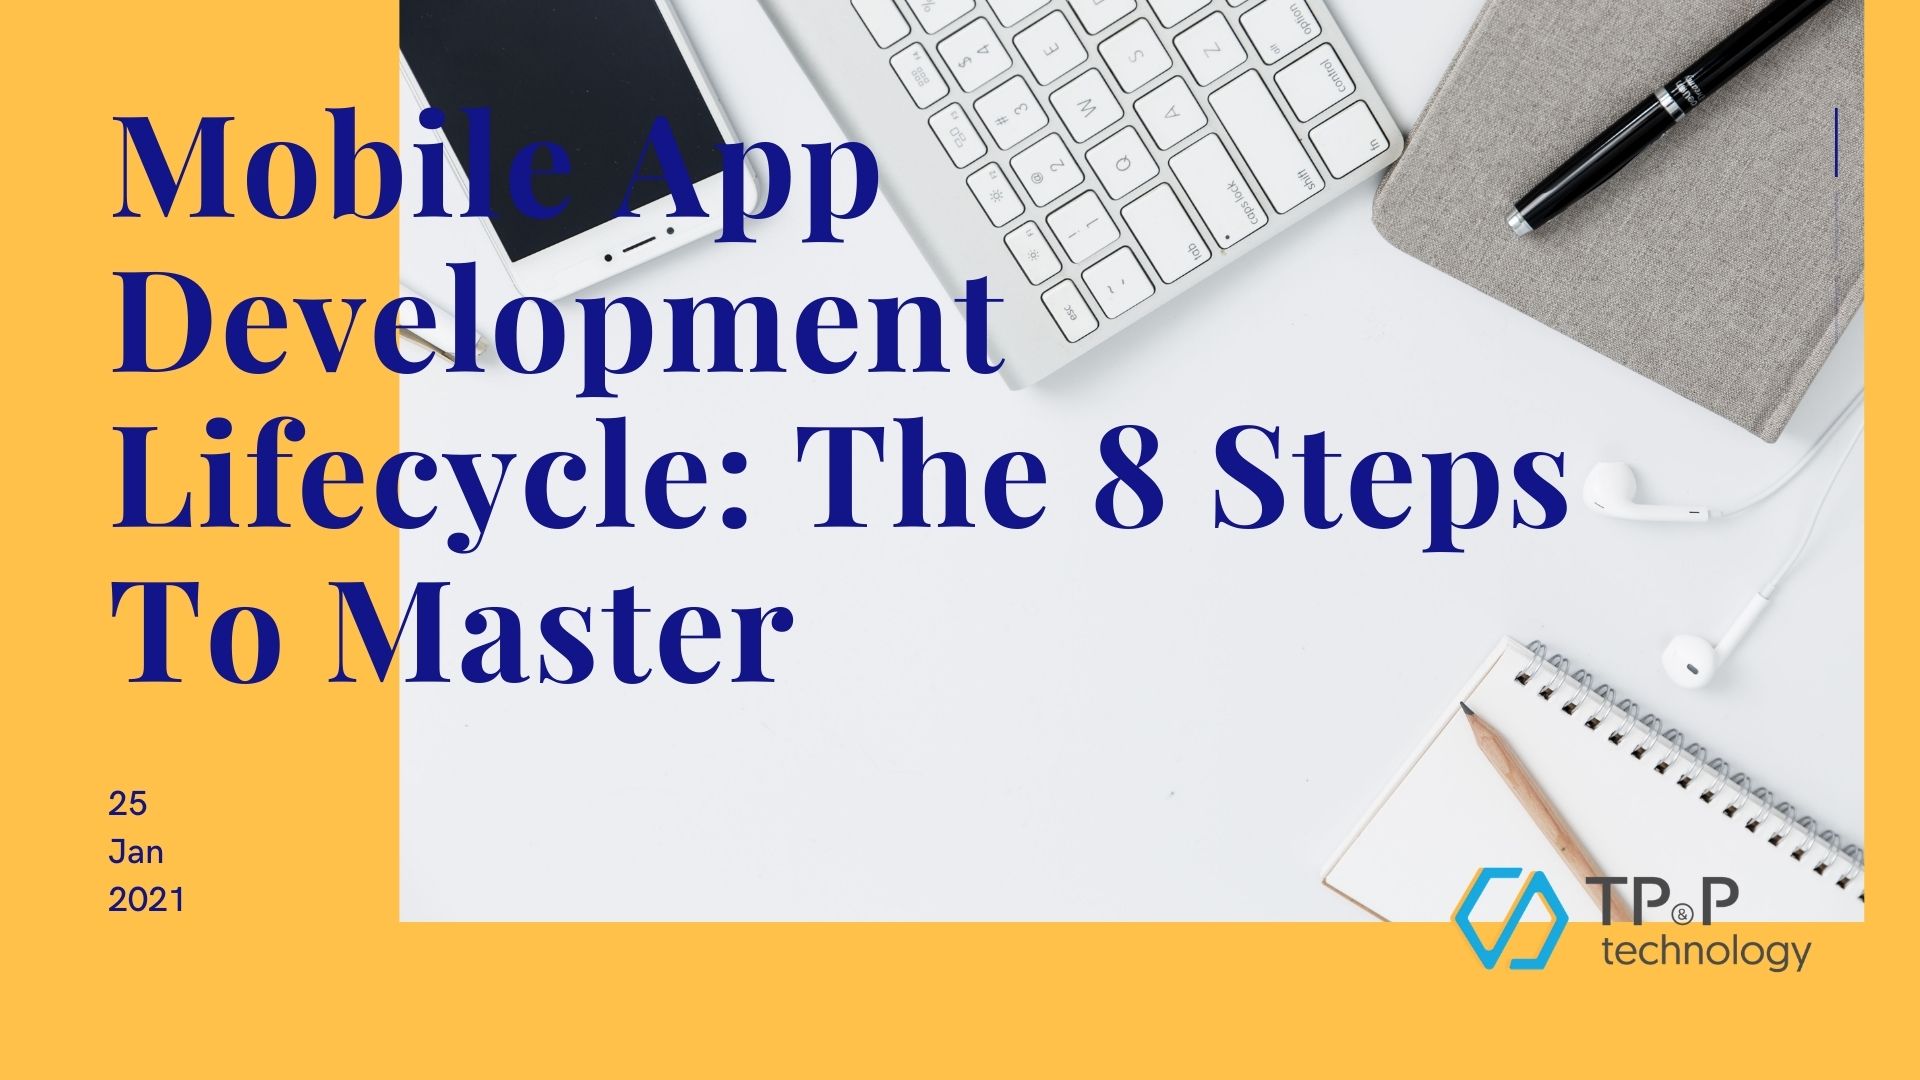 Mobile App Development Lifecycle: The 8 Steps To Master